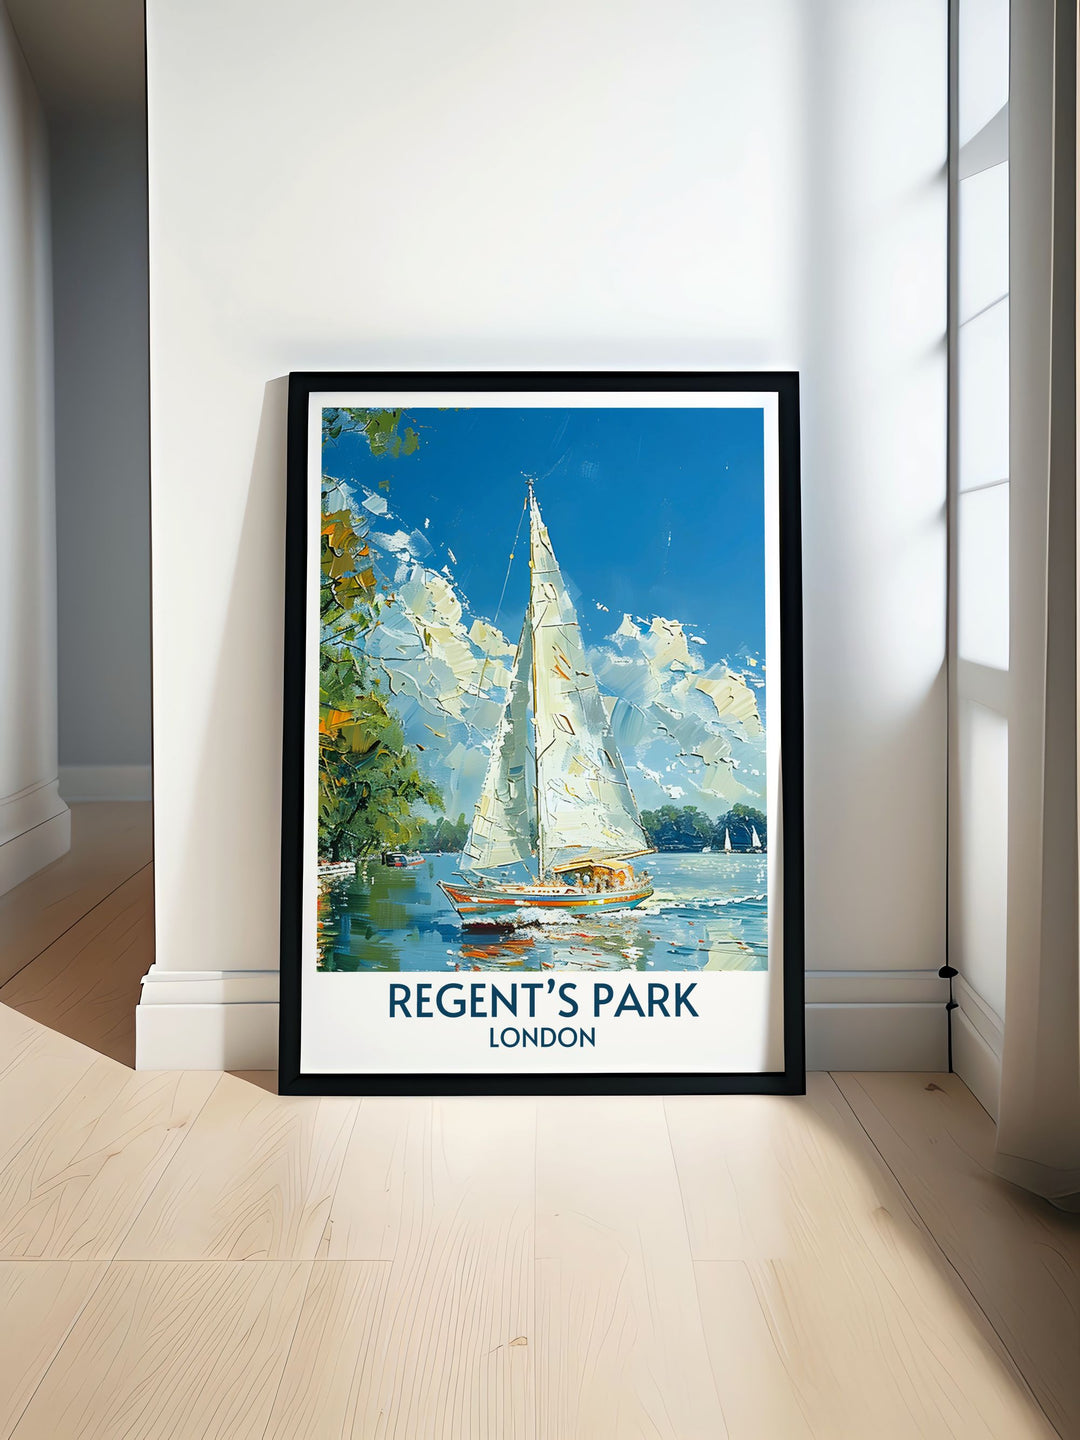 Regents Park Modern Wall Decor capturing the serene beauty of Londons skyline, perfect for adding a touch of tranquility to your home decor.